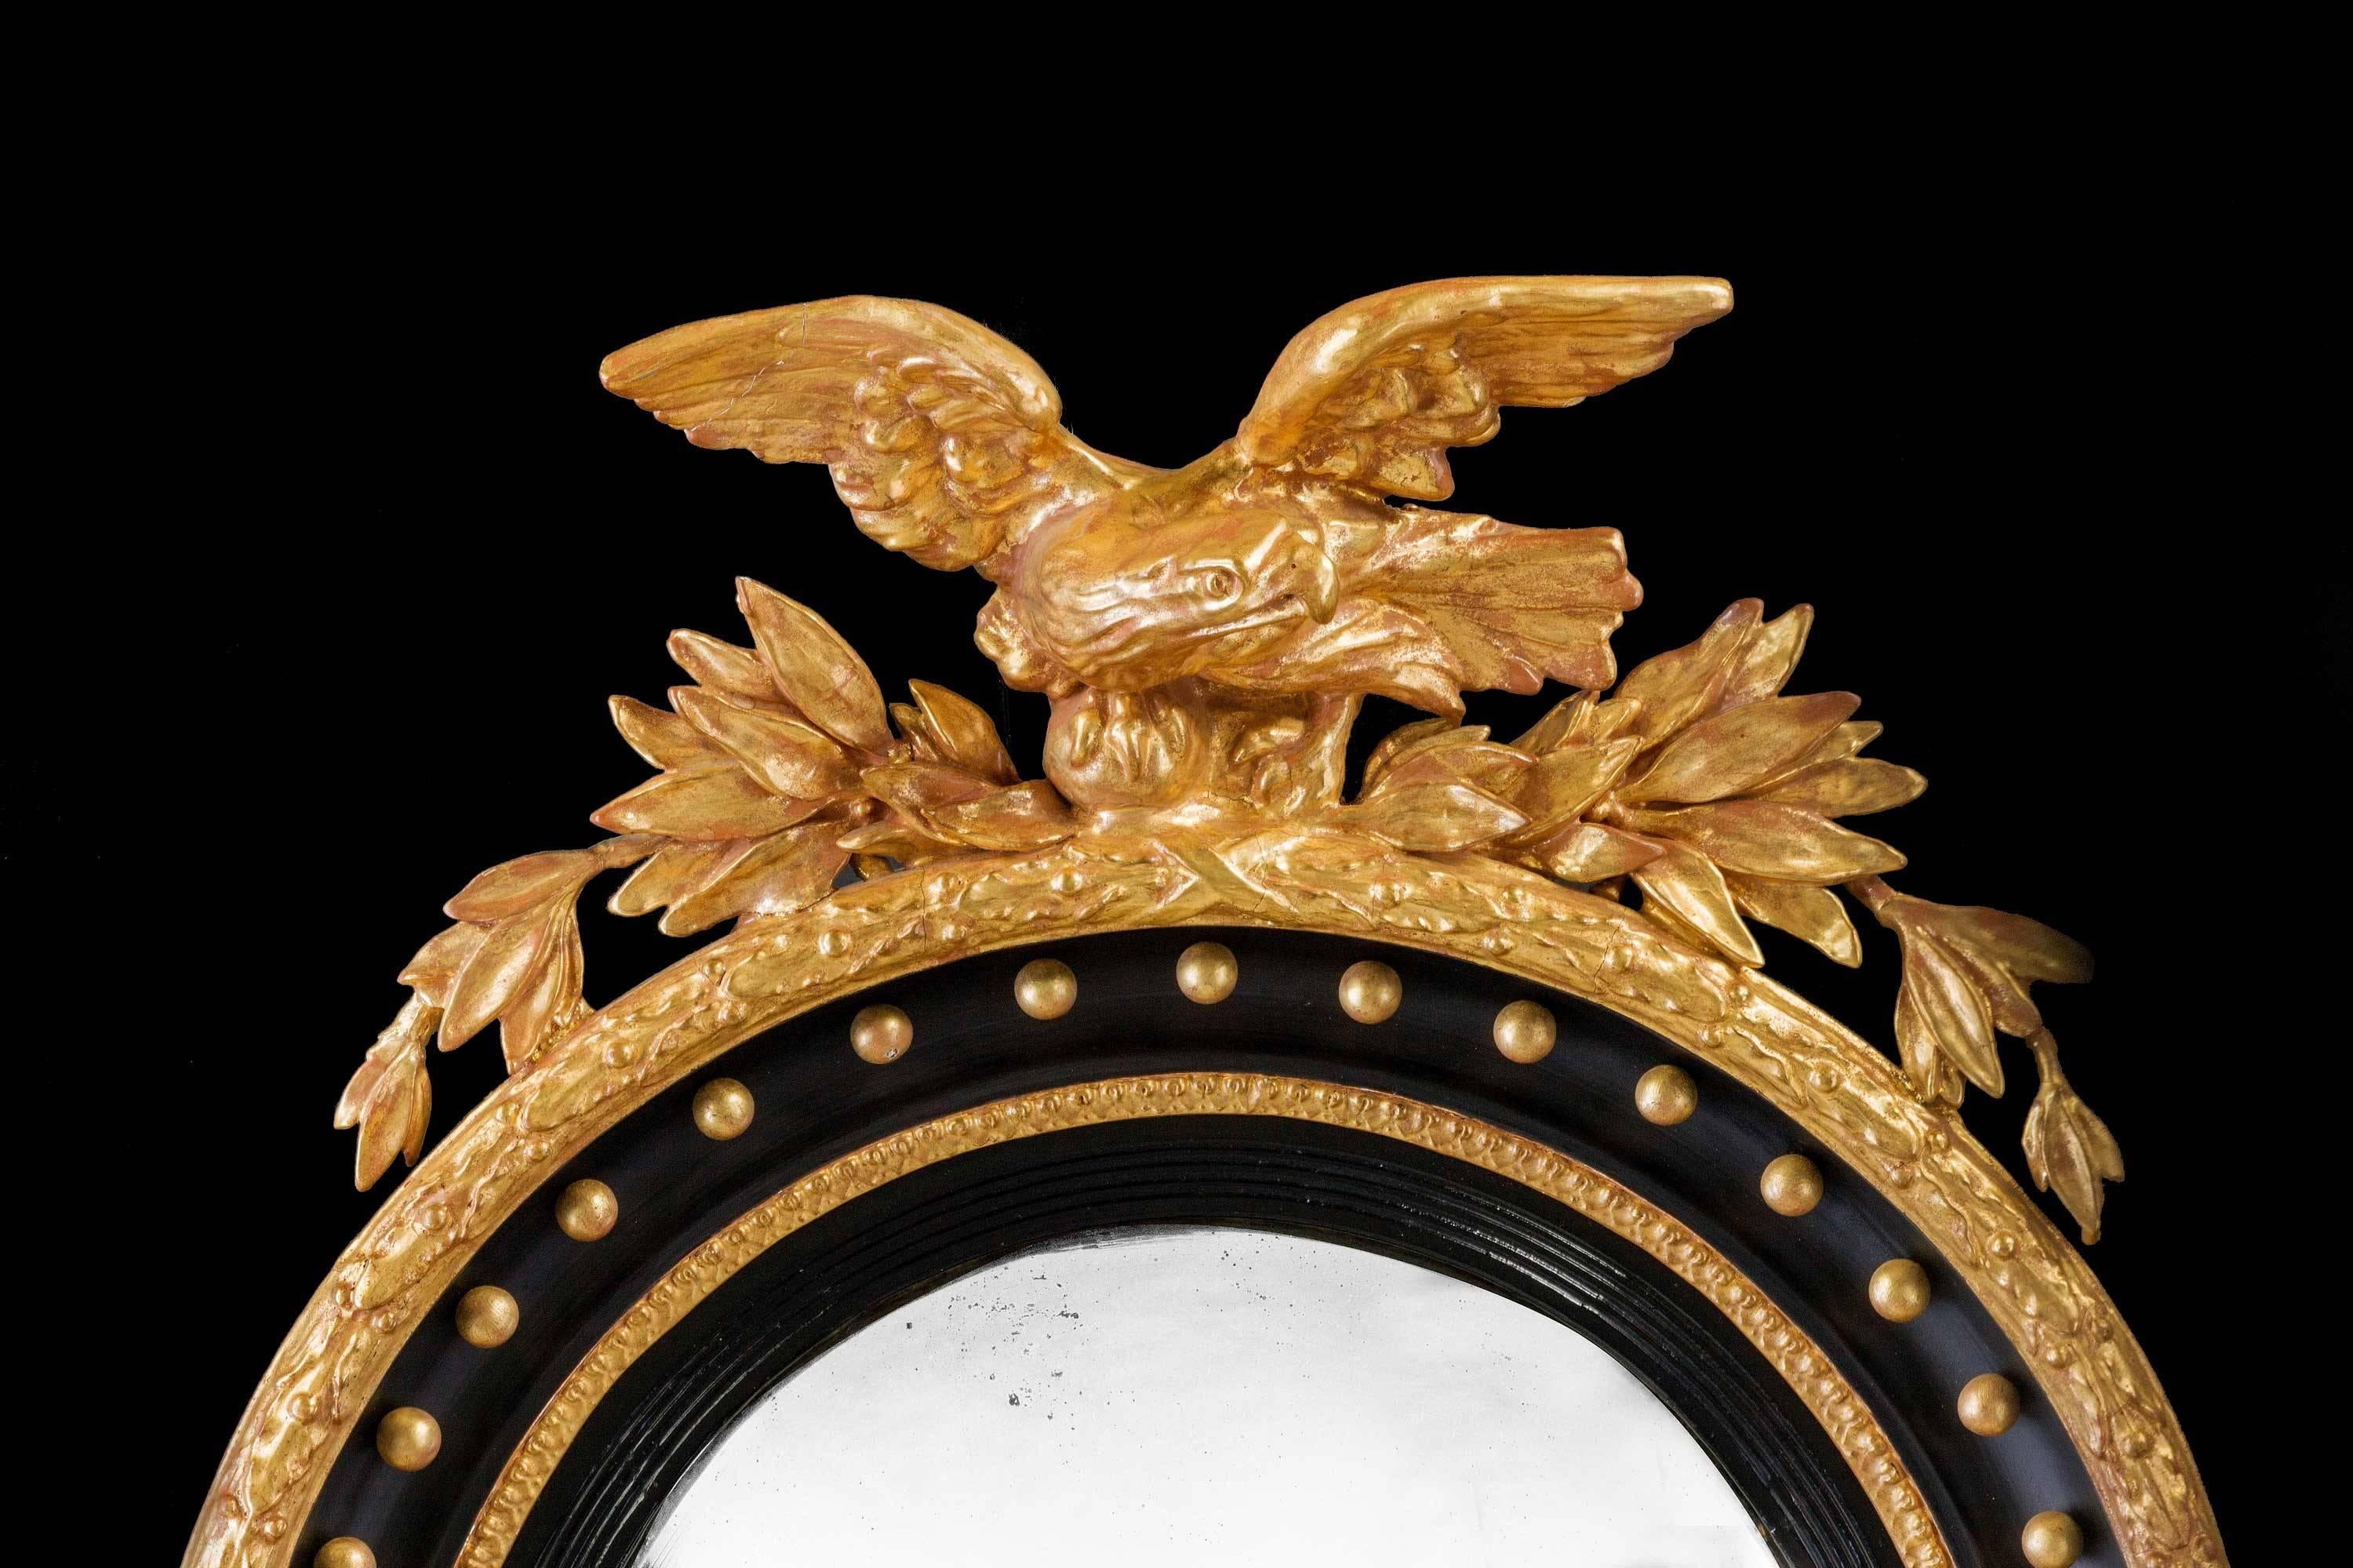 A fine giltwood and parcel gilt Regency period convex mirror, the top with a vigorously carved eagle in-flight between foliage, the inner border with decorative balls.